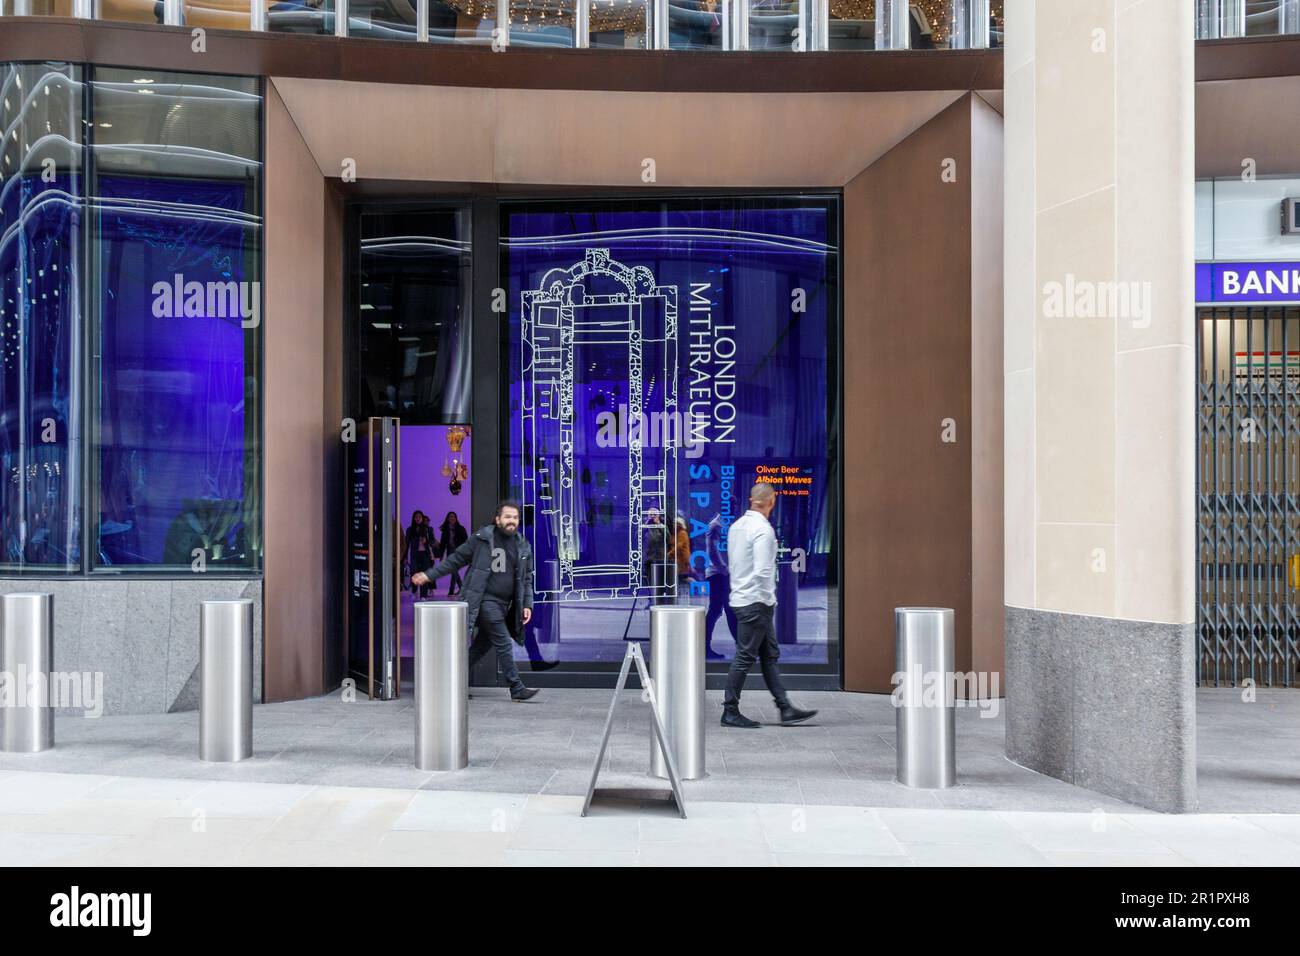 The London Mithraeum in the Bloomberg building in Walbrook, London, UK Stock Photo